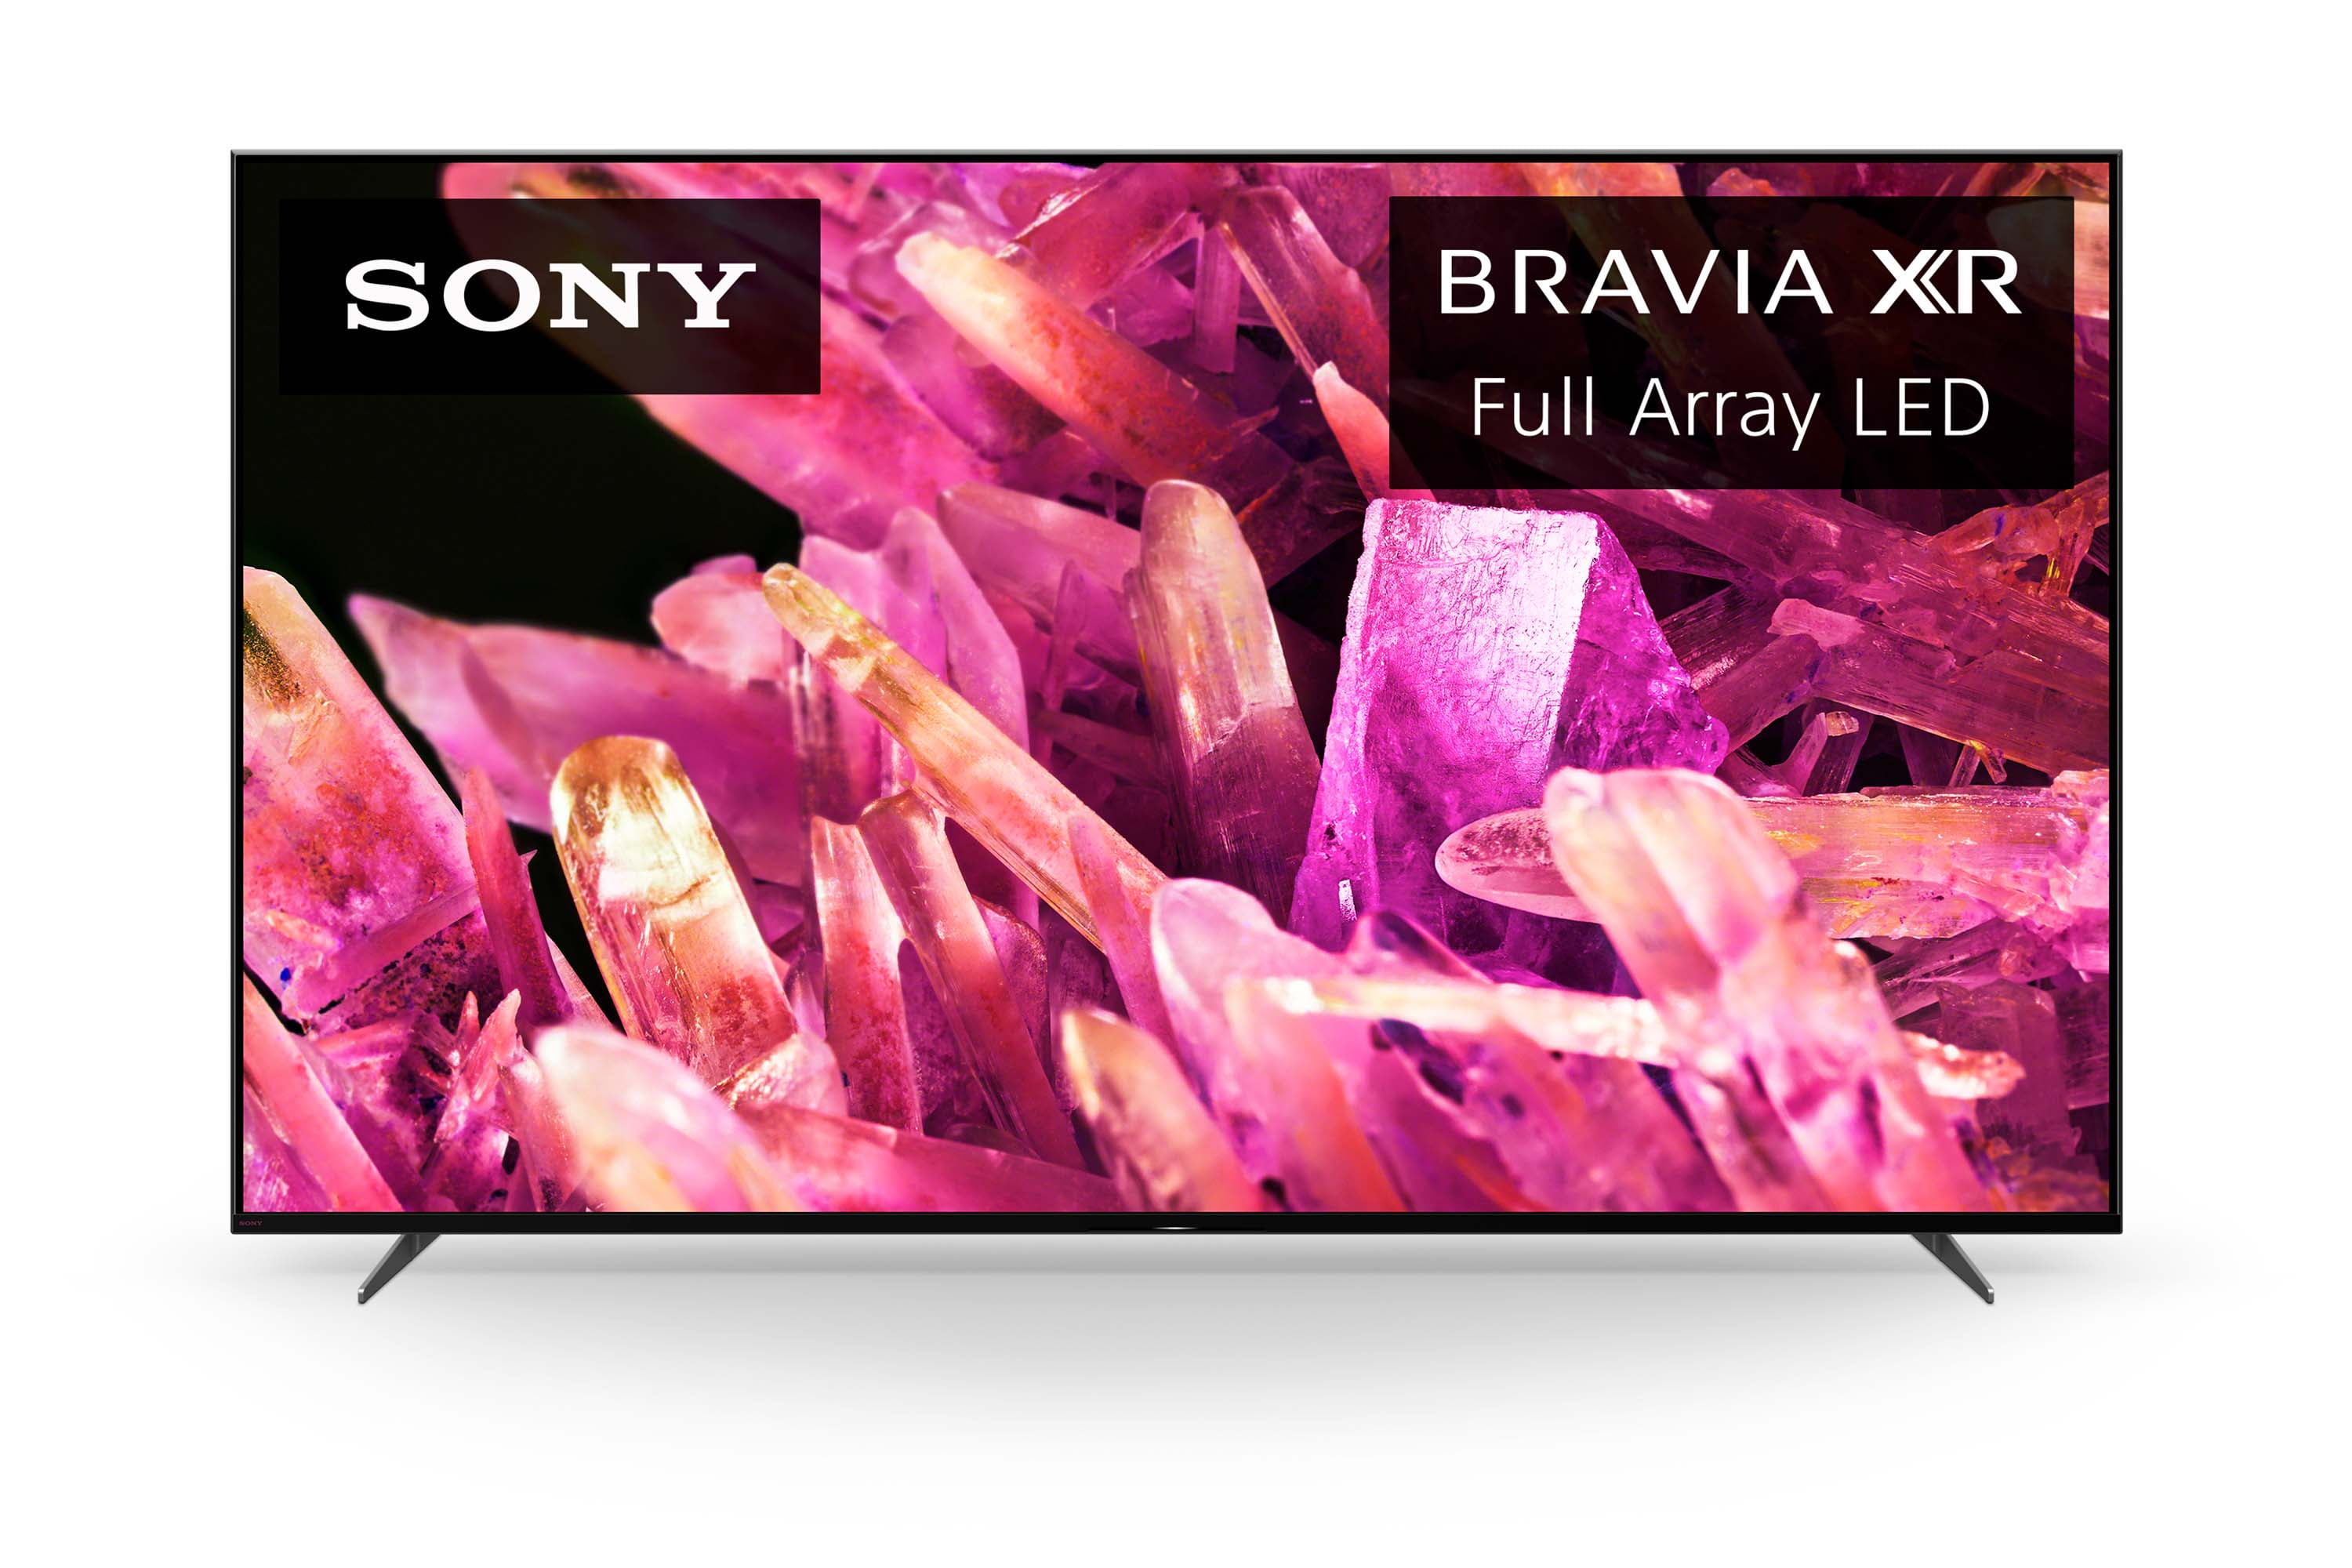 The Sony Bravia X900H 4K 120Hz Mode Does Suffer From a 'Blur' Issue